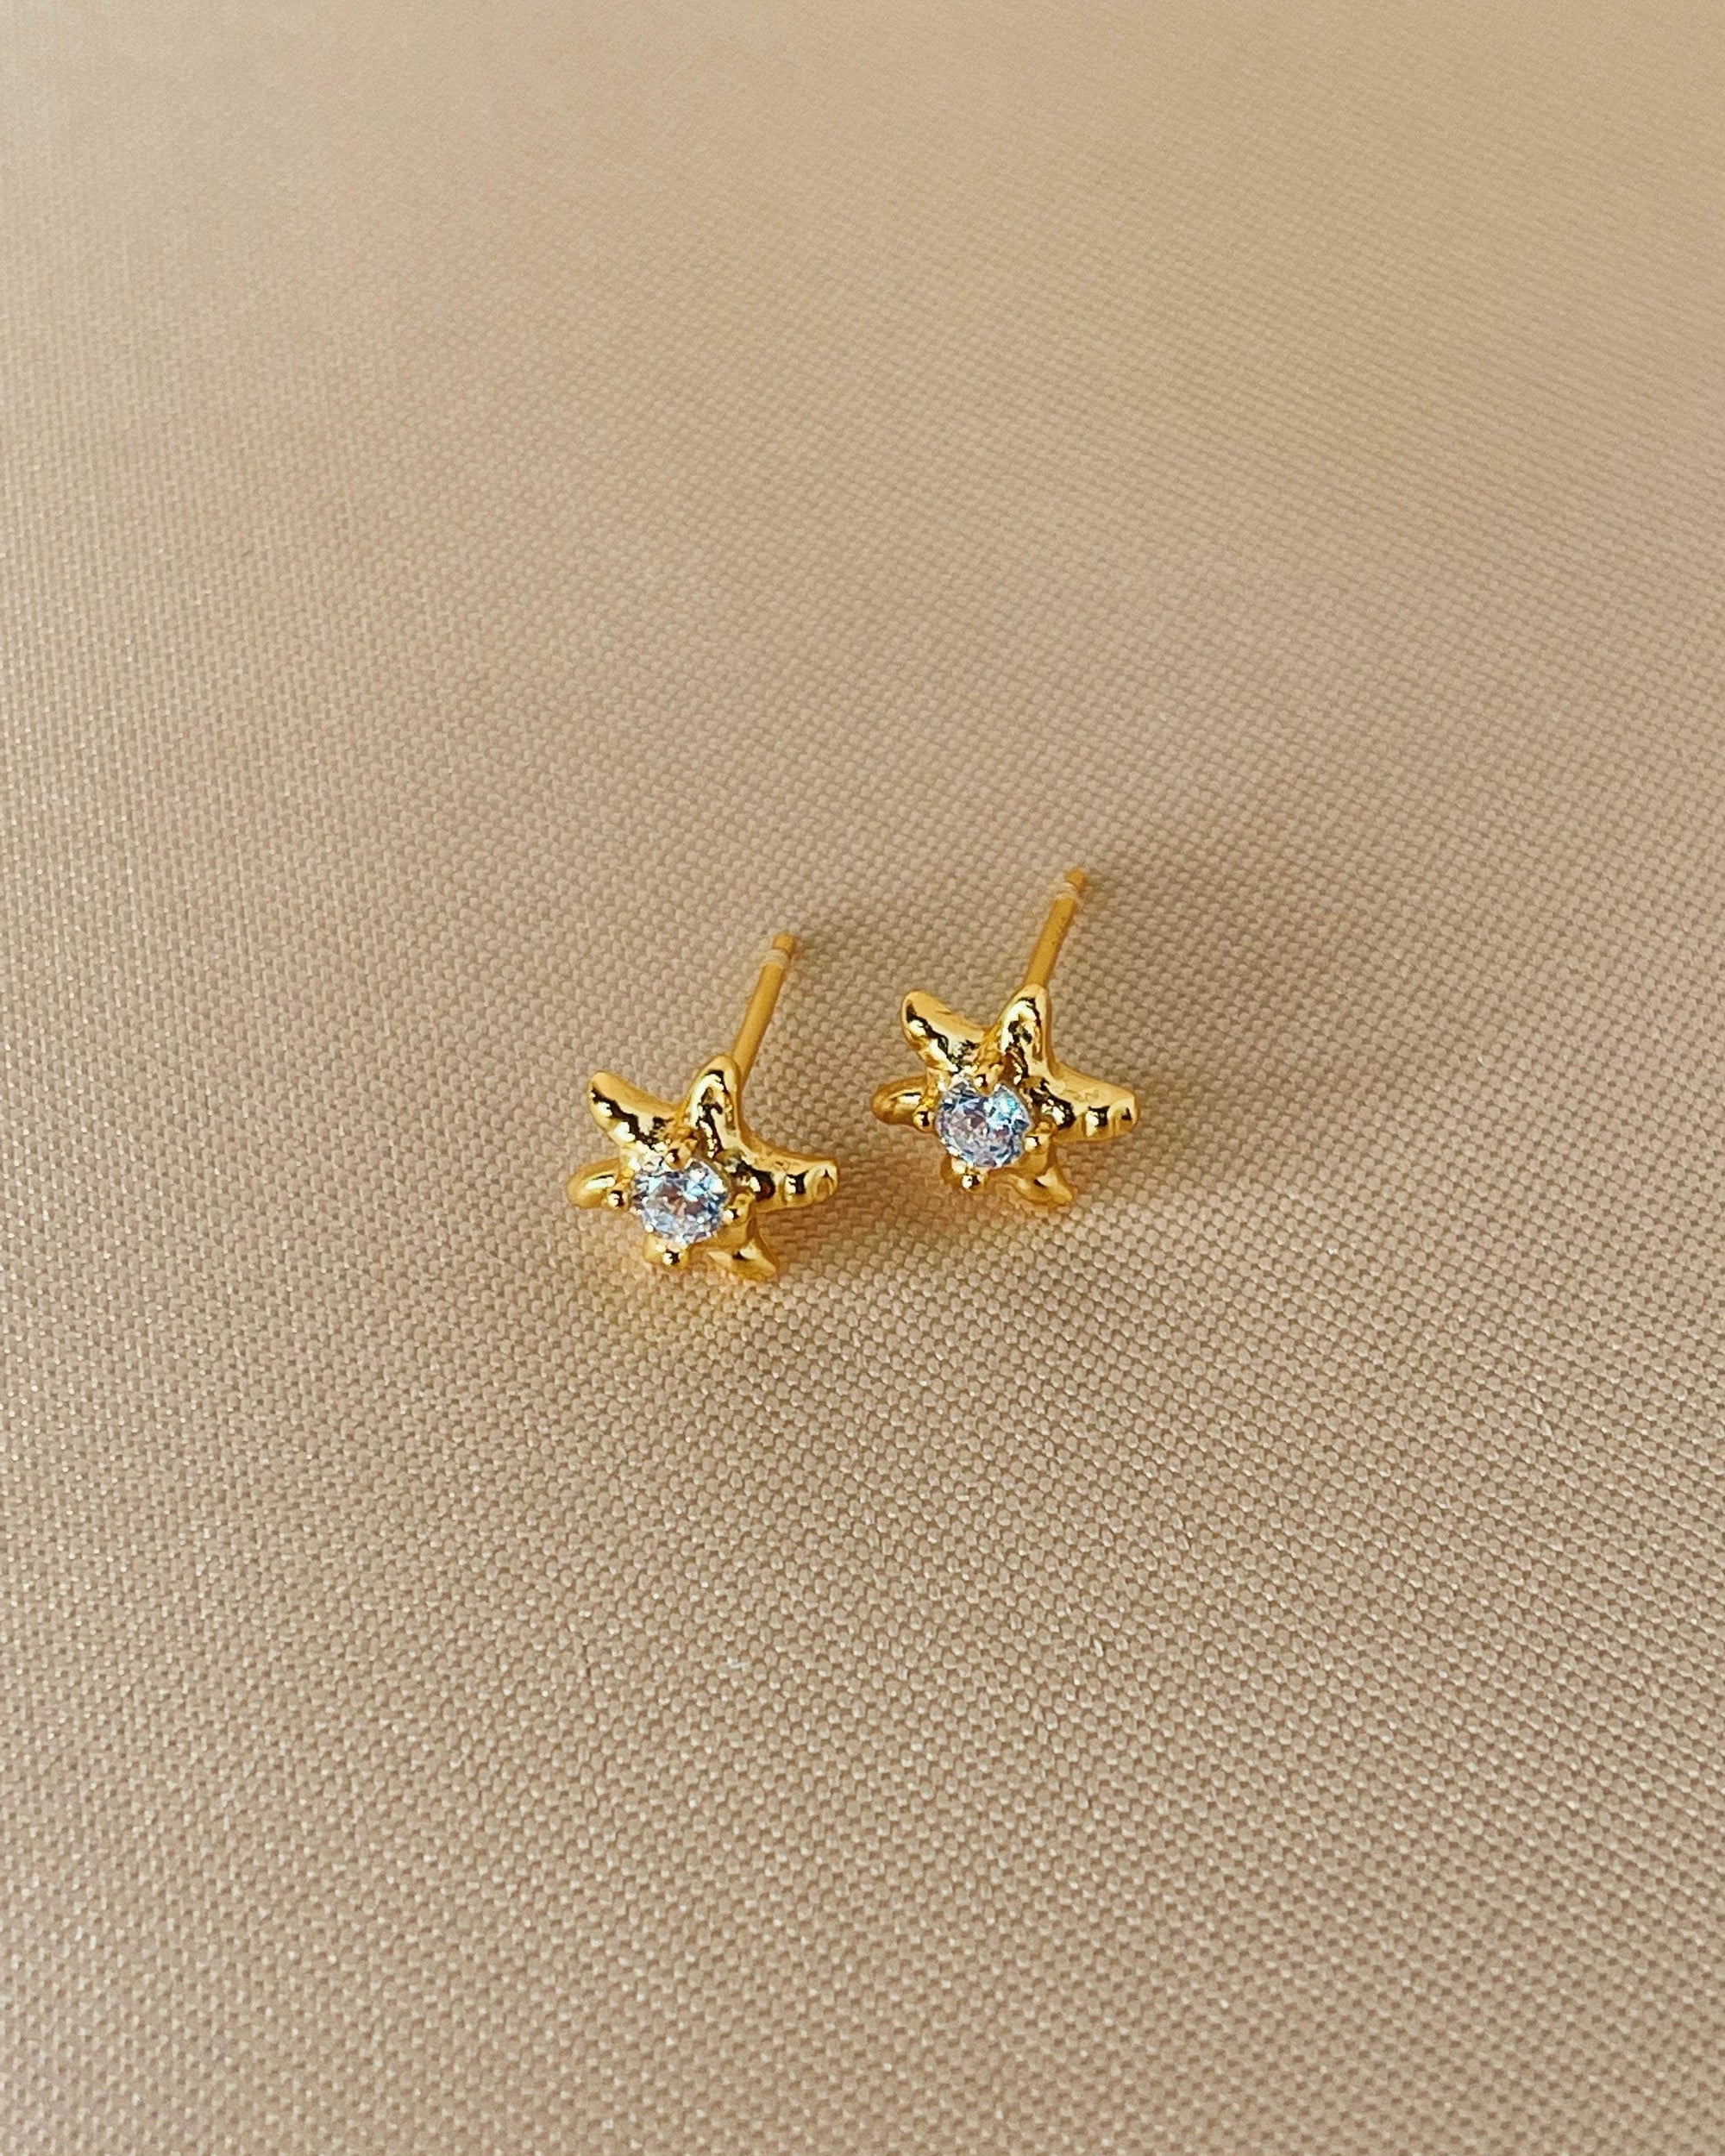 So Dainty Co. Earrings Emani Gold Studs Gold Plated 925 Sterling Silver Jewelry